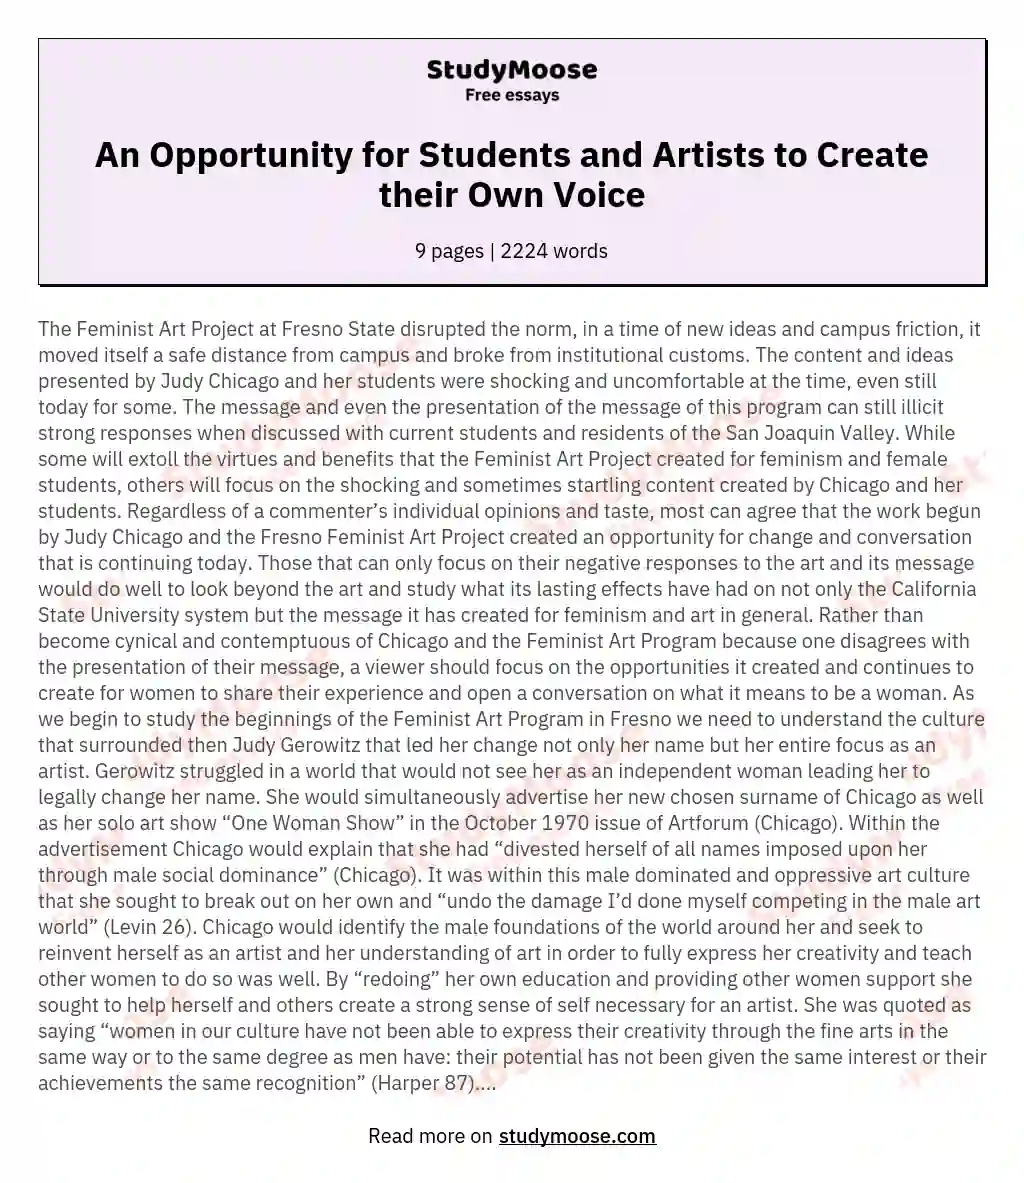 An Opportunity for Students and Artists to Create their Own Voice essay